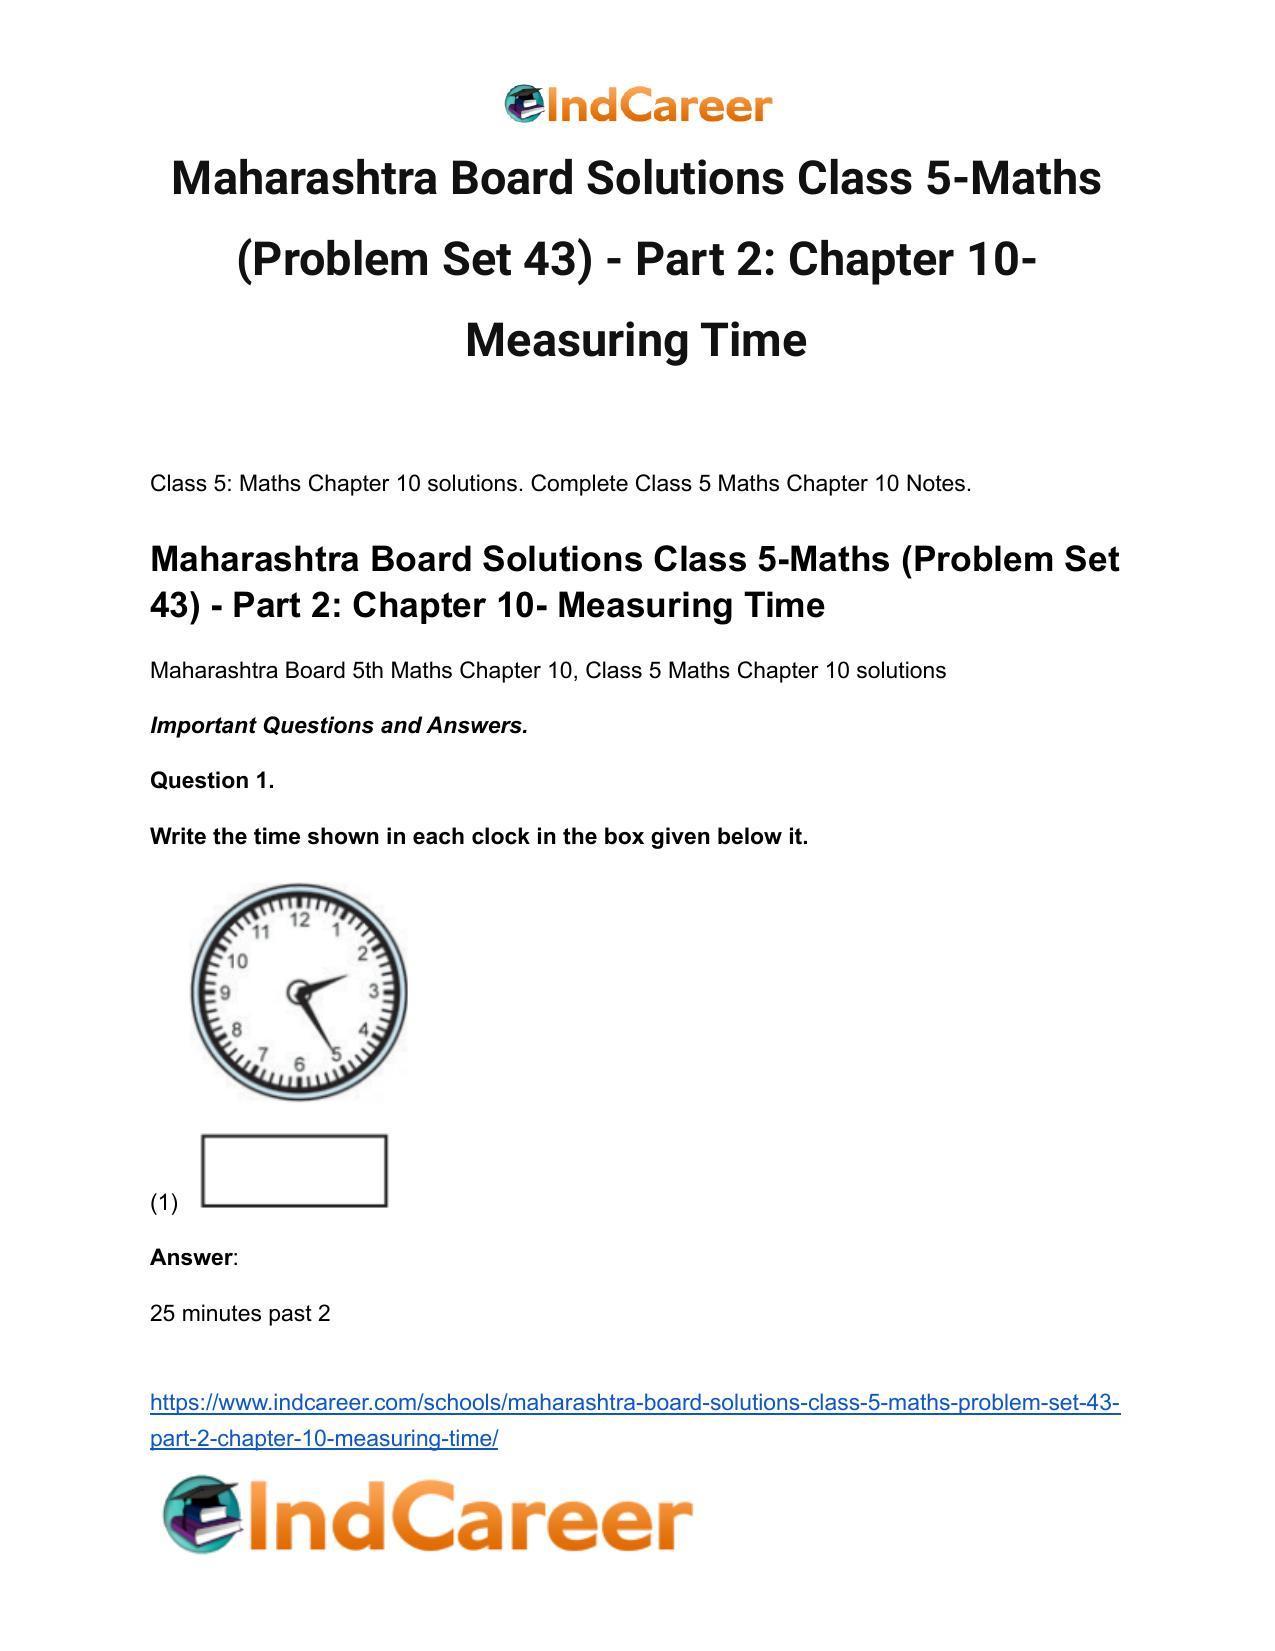 Maharashtra Board Solutions Class 5-Maths (Problem Set 43) - Part 2: Chapter 10- Measuring Time - Page 2